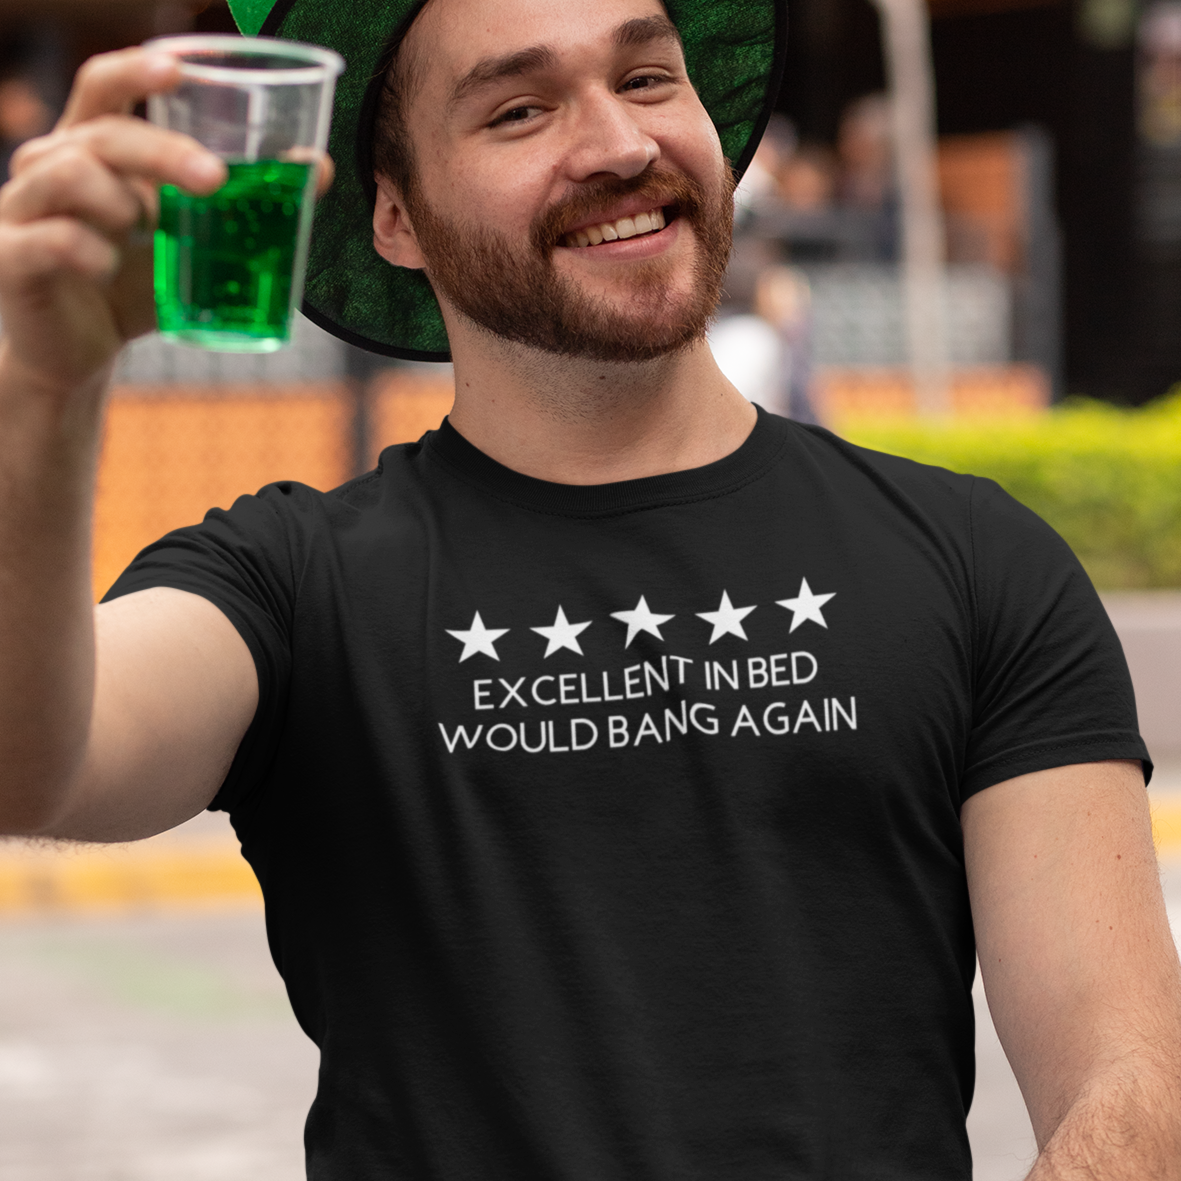 excellent-in-bed-would-bang-again-five-stars-black-t-shirt-funny-mockup-of-a-man-at-a-st-patricks-celebration-drinking-a-green-beer